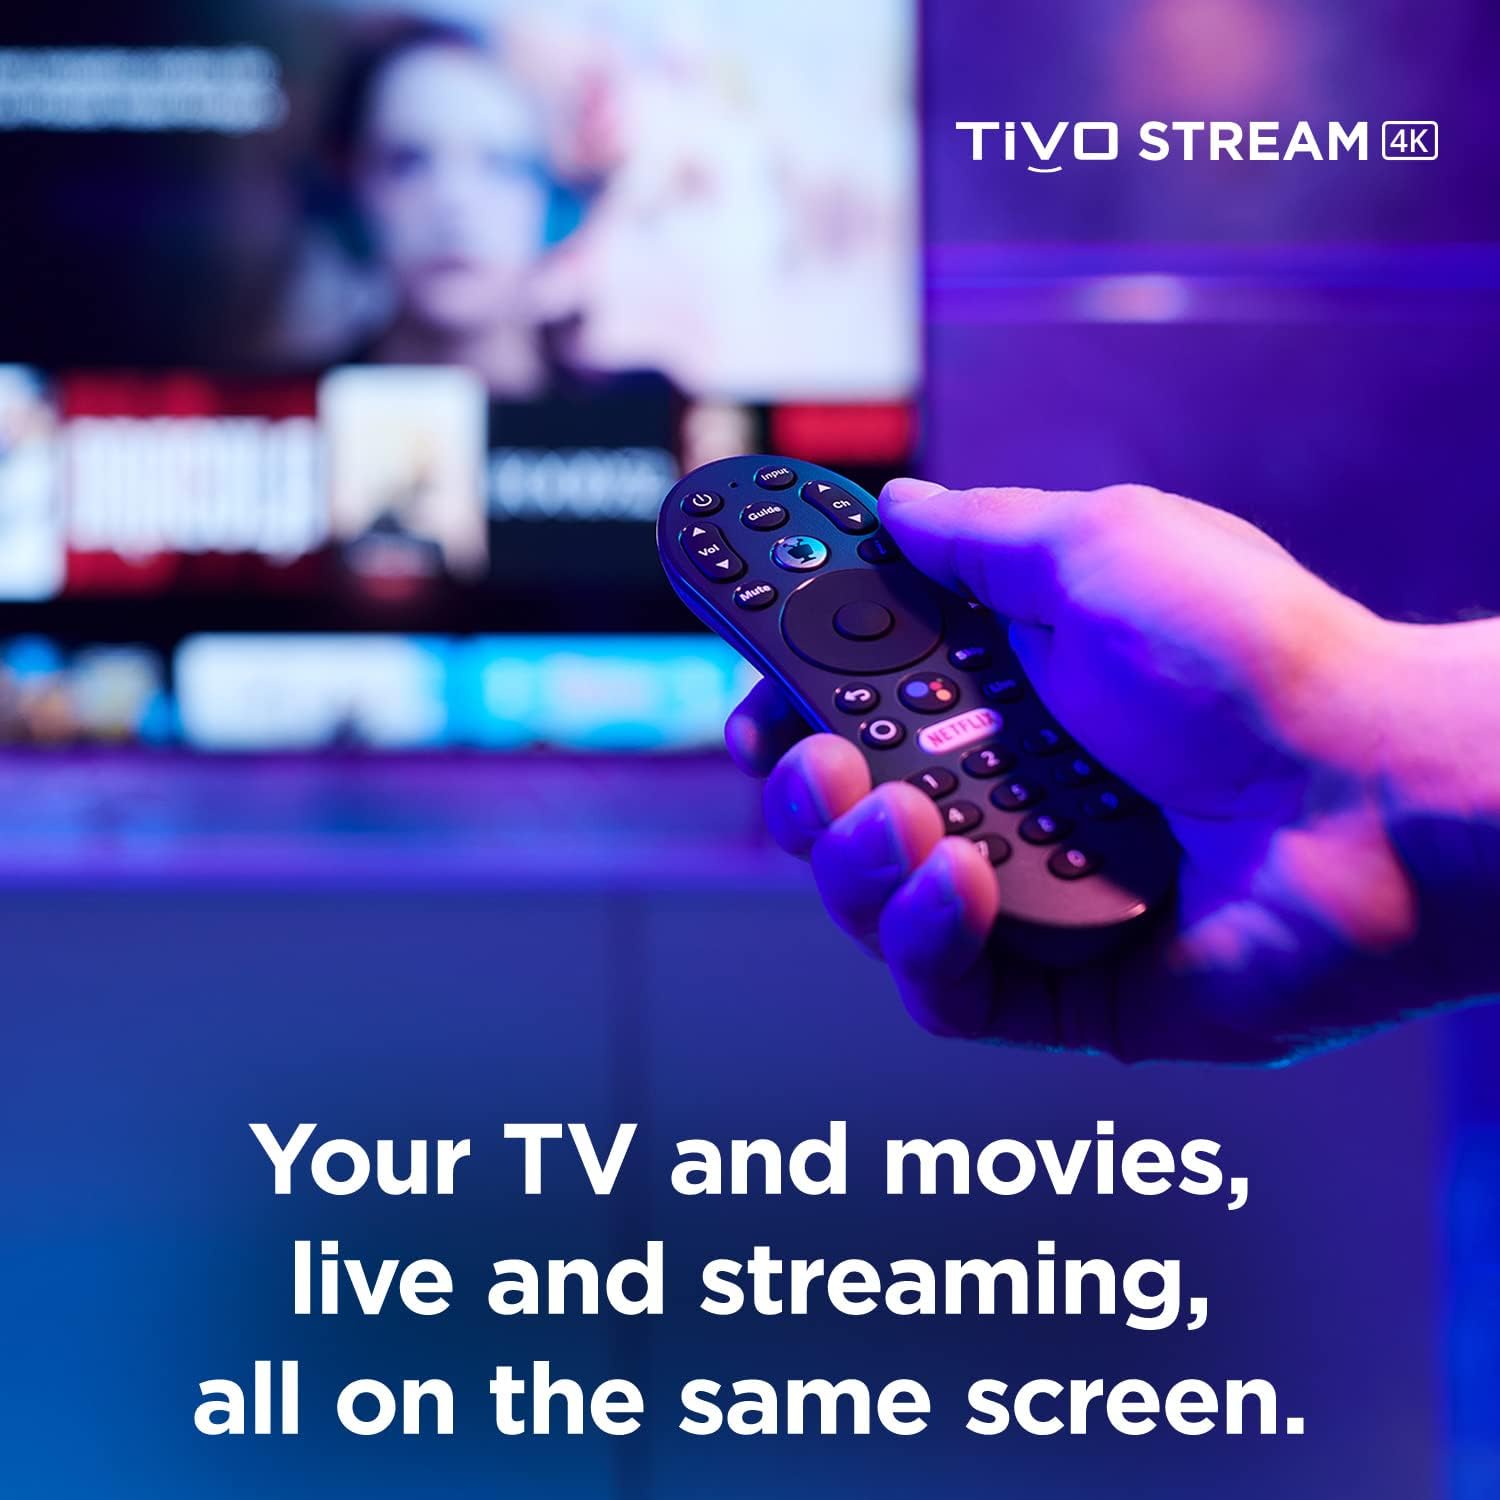 TiVo Stream 4K – Every Streaming App and Live TV on One Screen – 4K UHD, Dolby Vision HDR and Dolby Atmos Sound – Powered by Android TV – Plug - In Smart TV - Amazing Gadgets Outlet